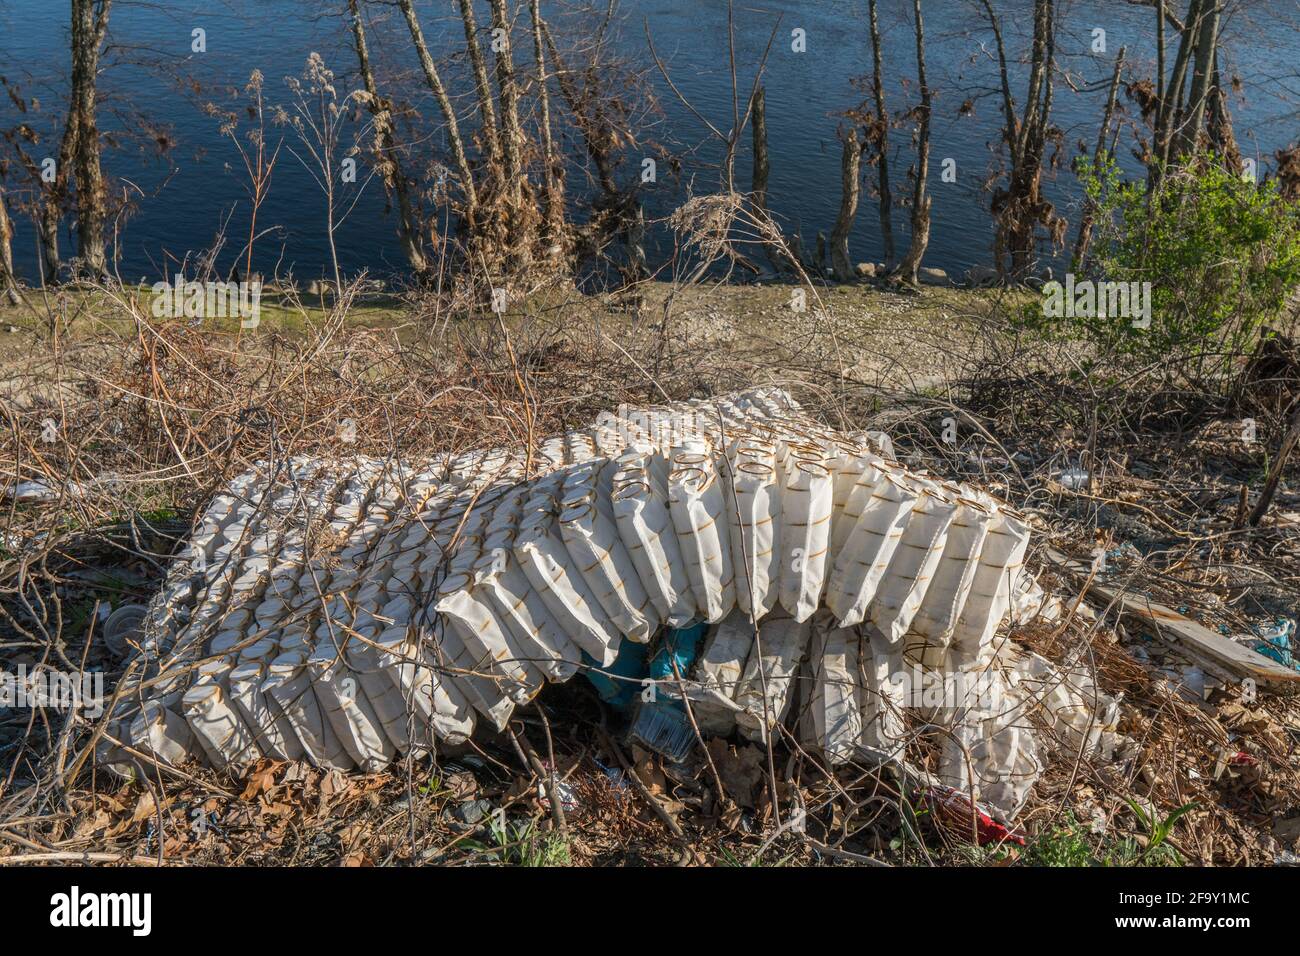 Old mattress dumped illegally in urban area. Stock Photo